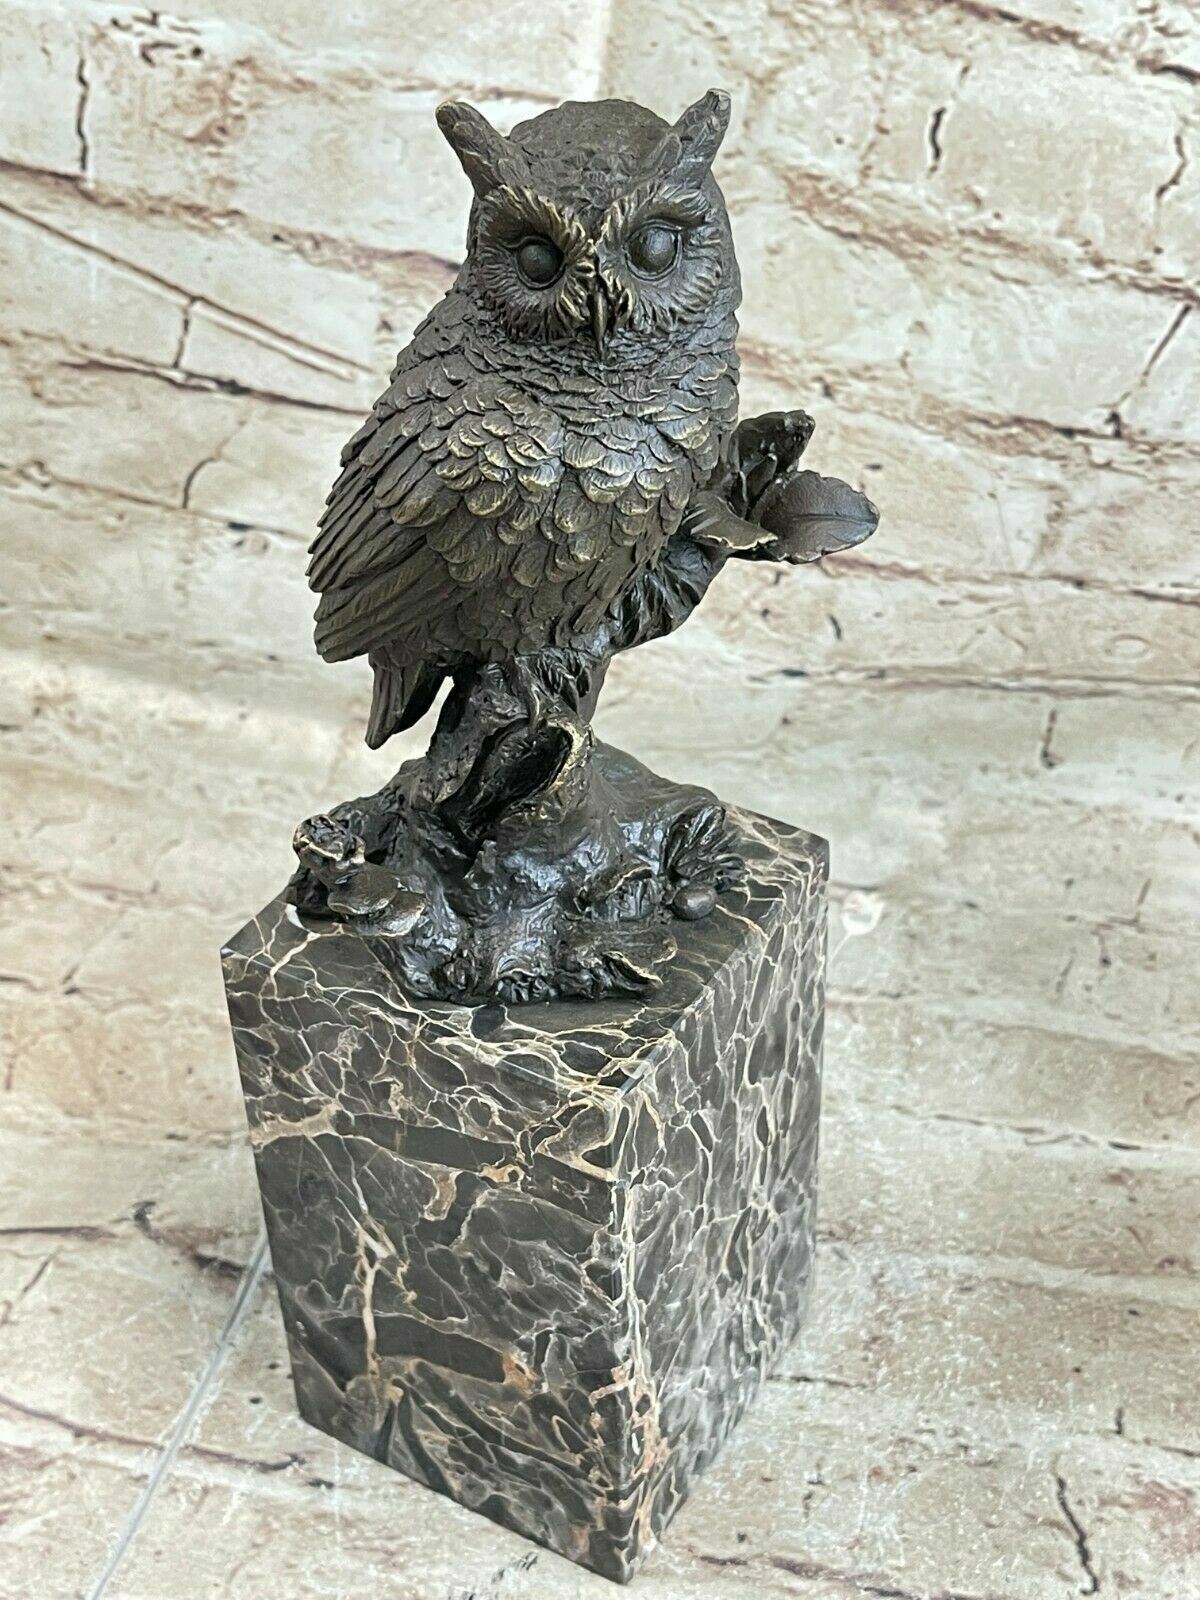 GREAT GIFT BRONZE SCULPTURE STATUE Animal Abstract Pure Owl Figurine HotCast Art